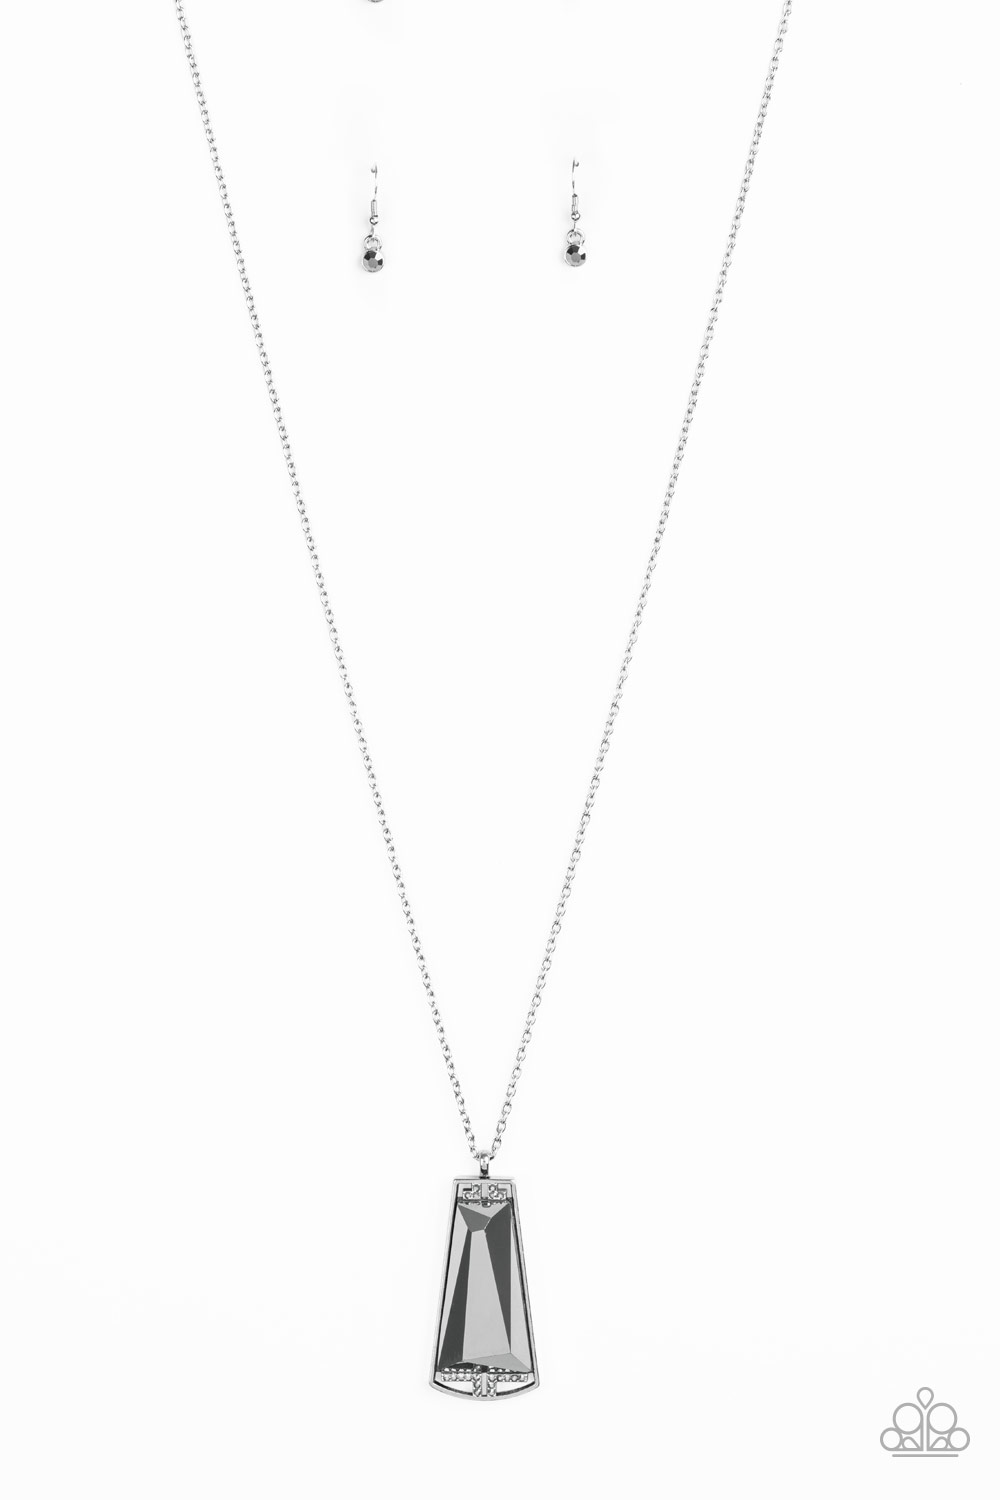 Necklace - Empire State Elegance - Silver